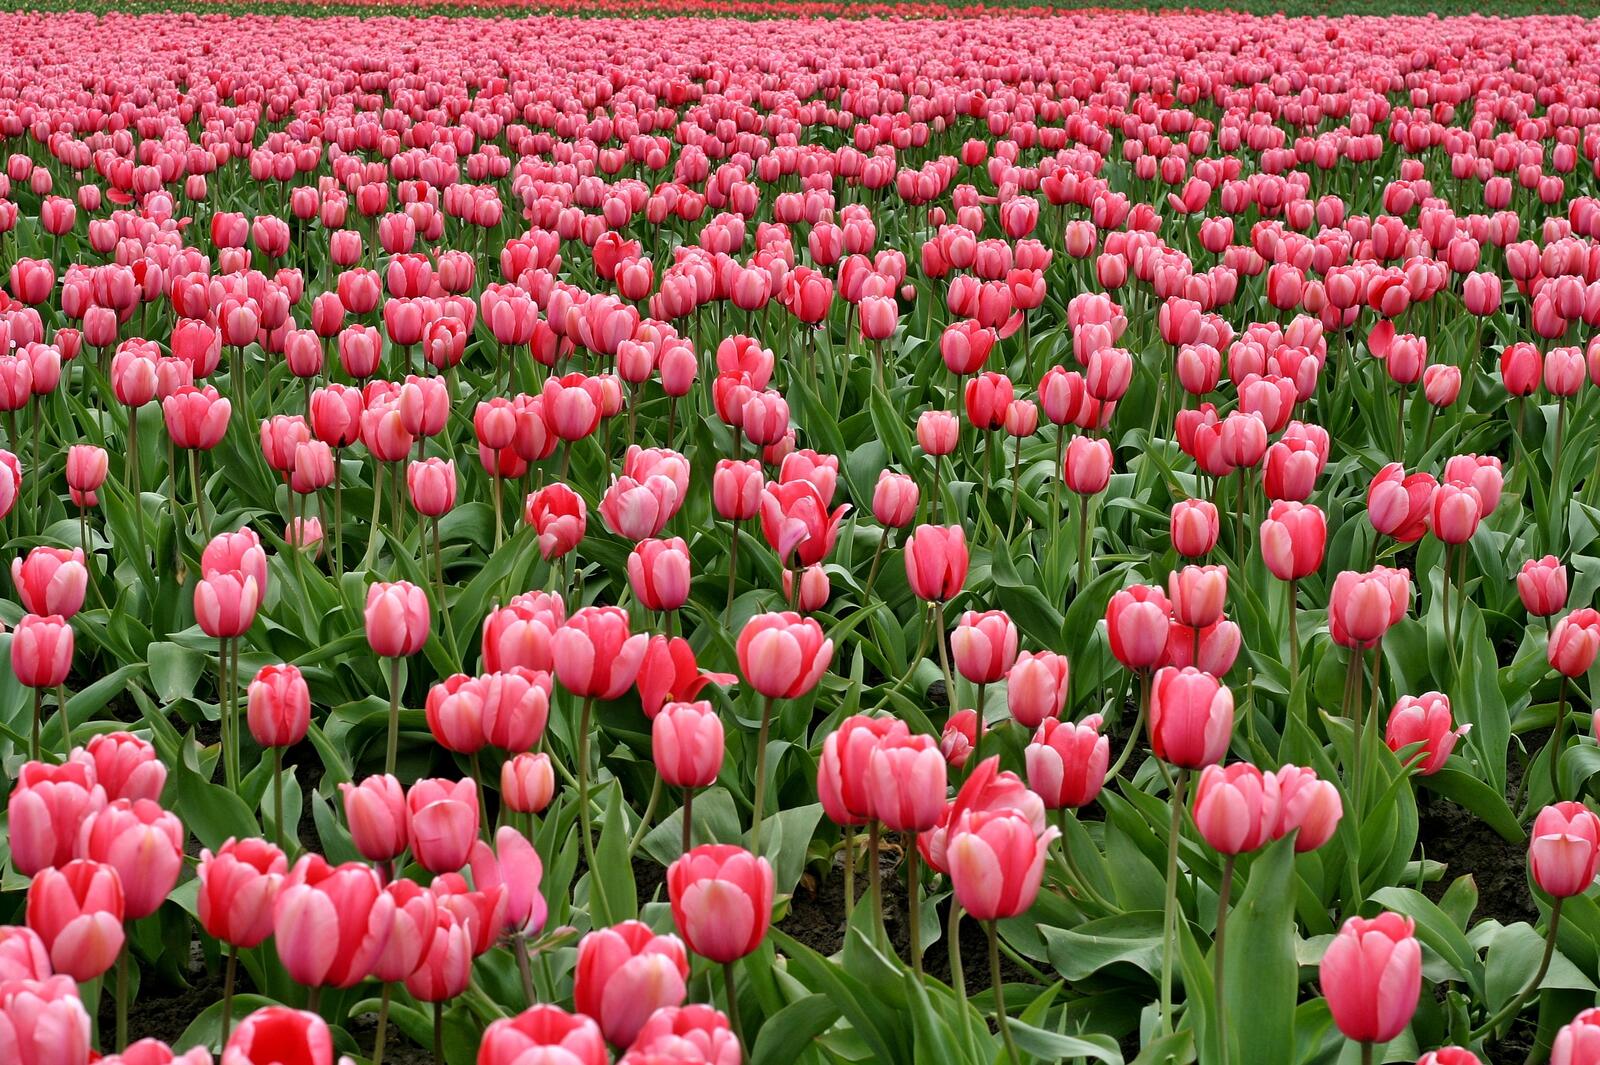 Free photo A large field of pink tulips.